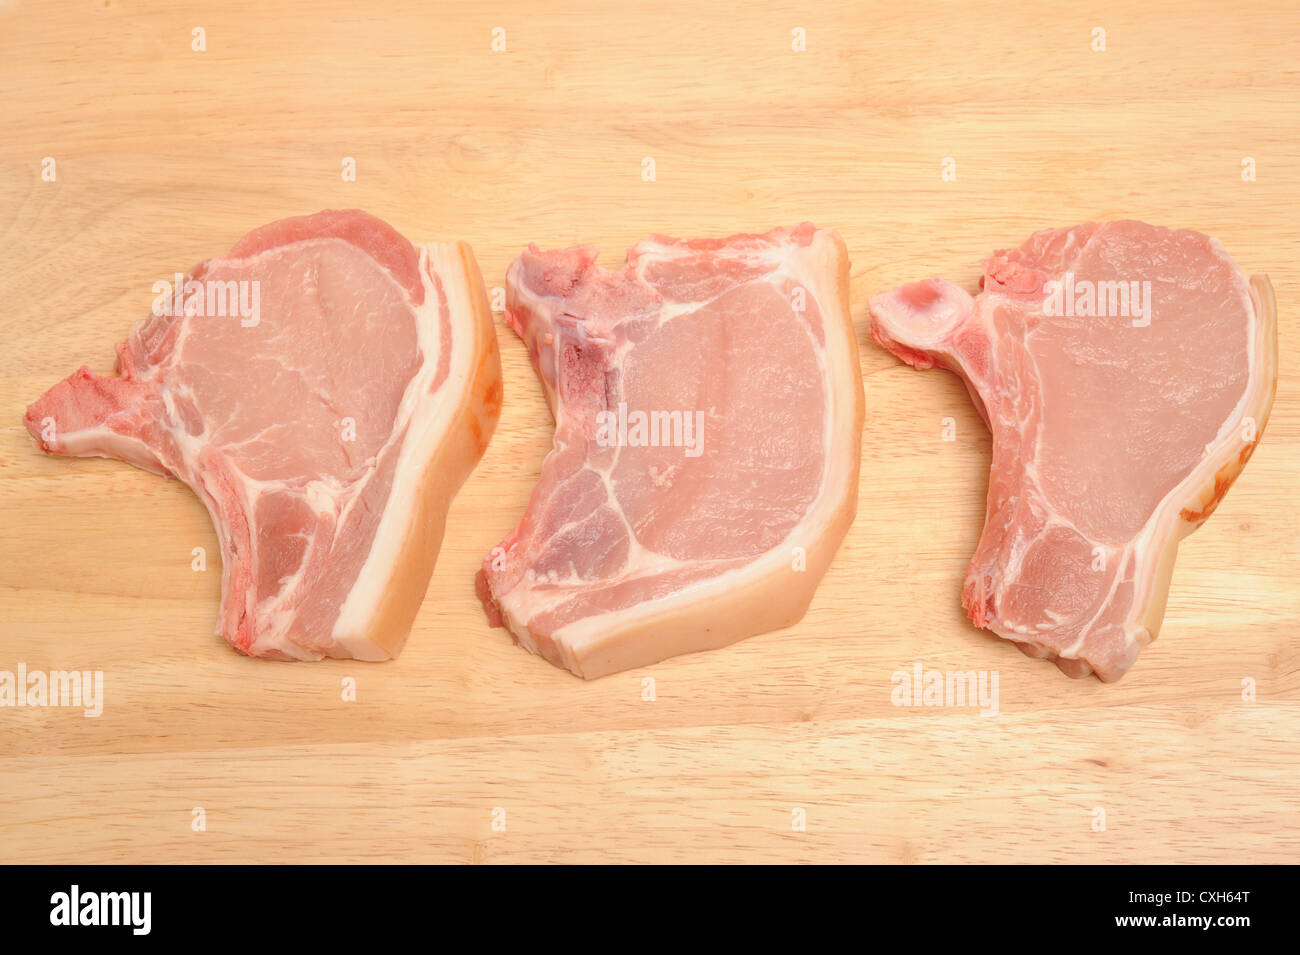 Pork chops on a work surface Stock Photo